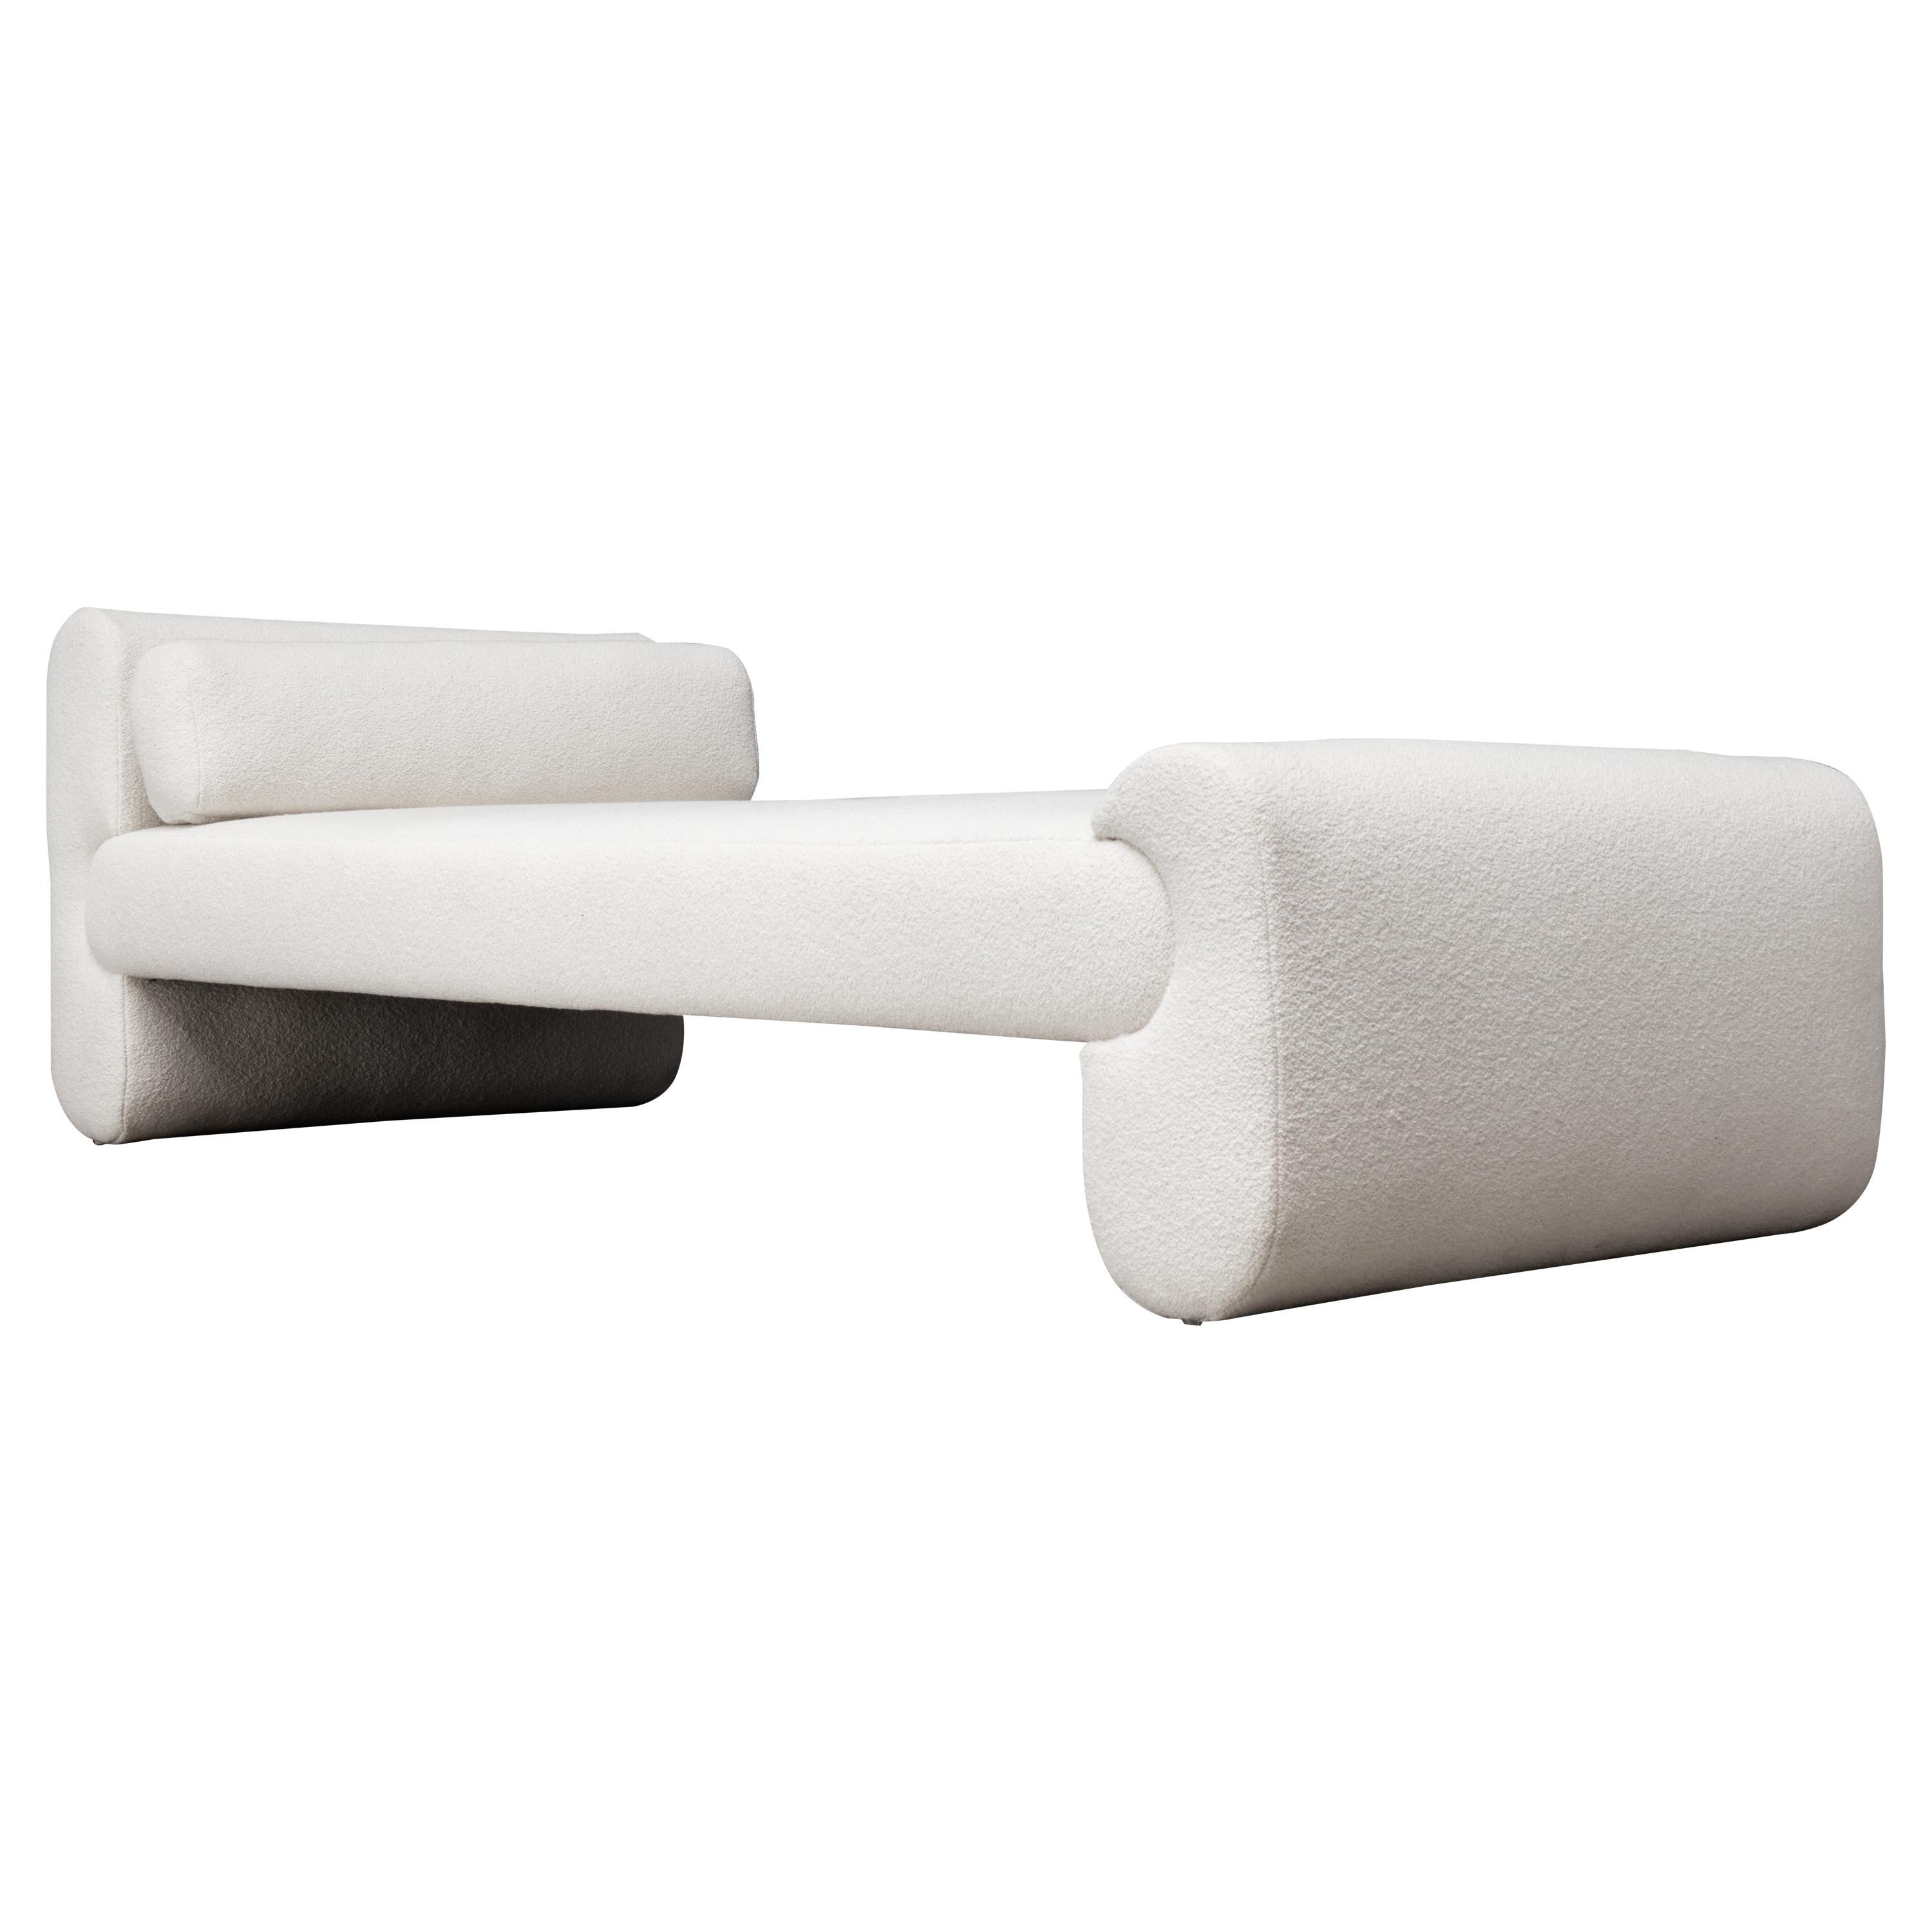 ASYM Day Bed - Modern Asymmetrical Day Bed in Cream Boucle